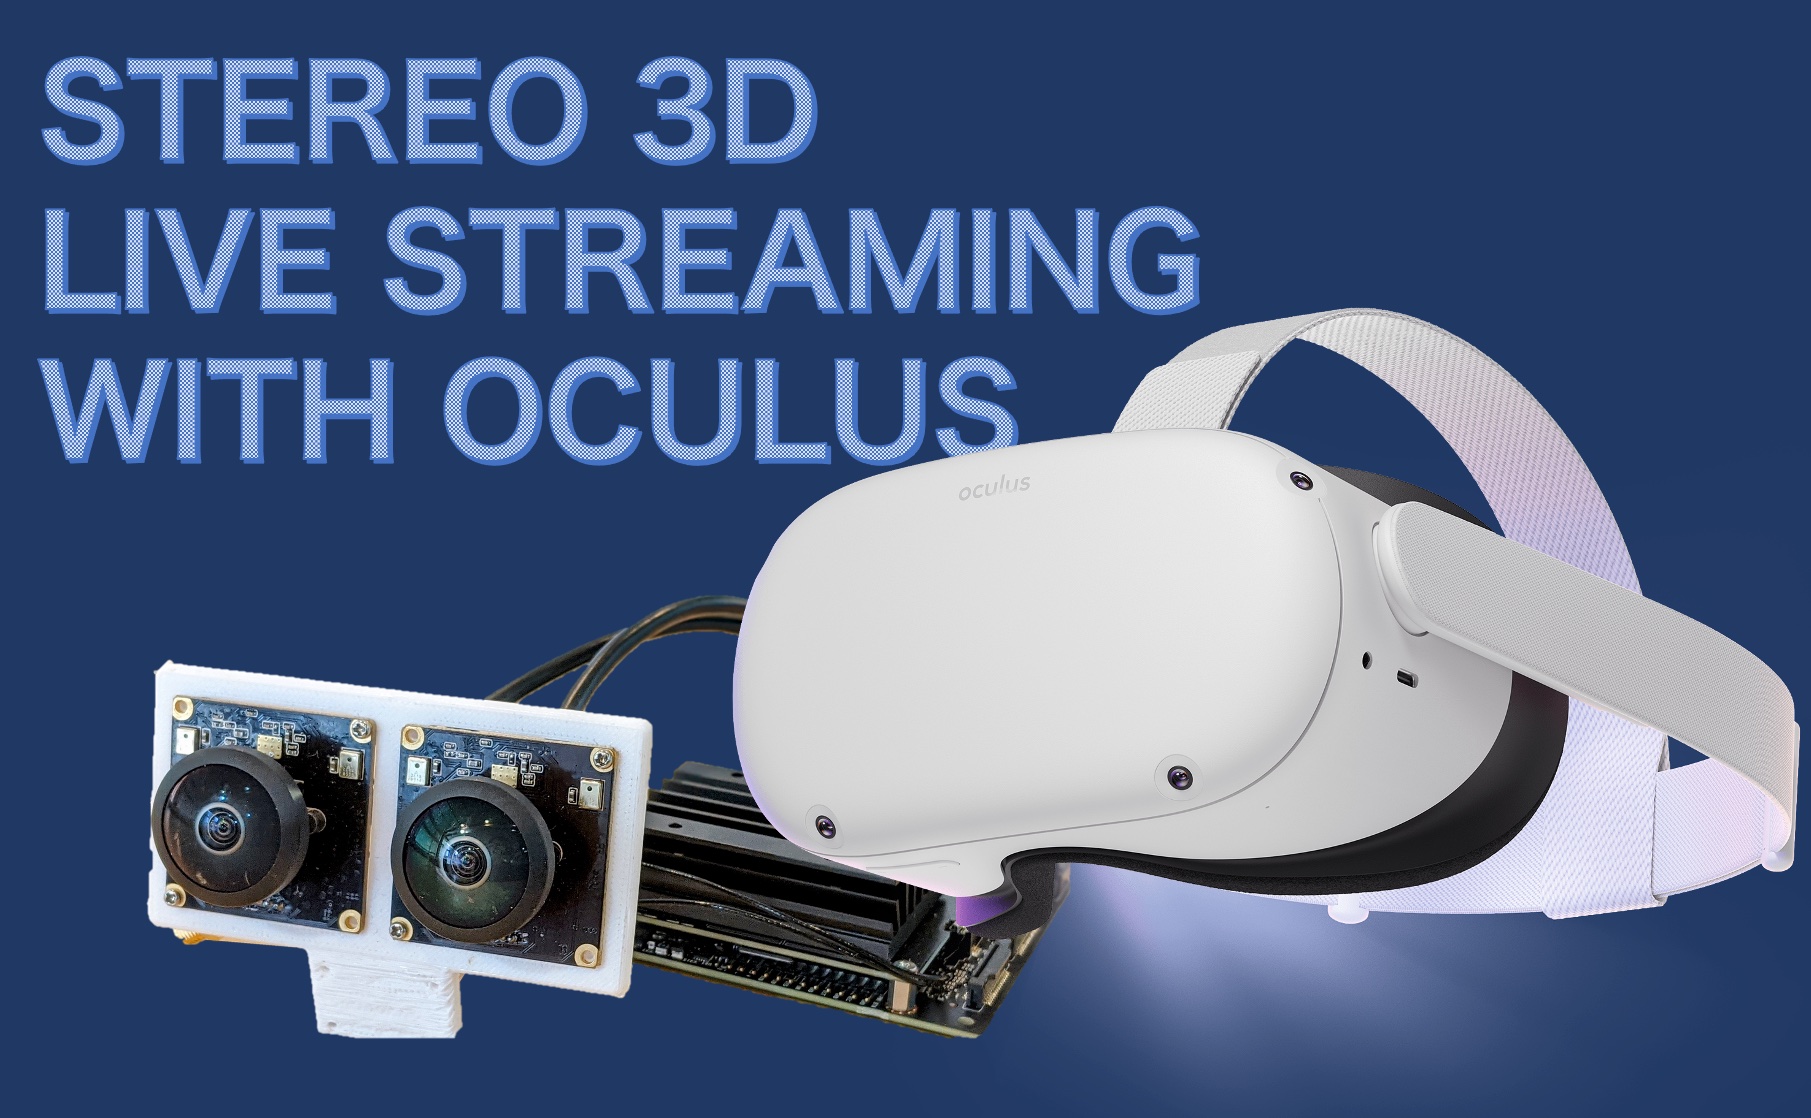 stereo 3d live streaming with oculus